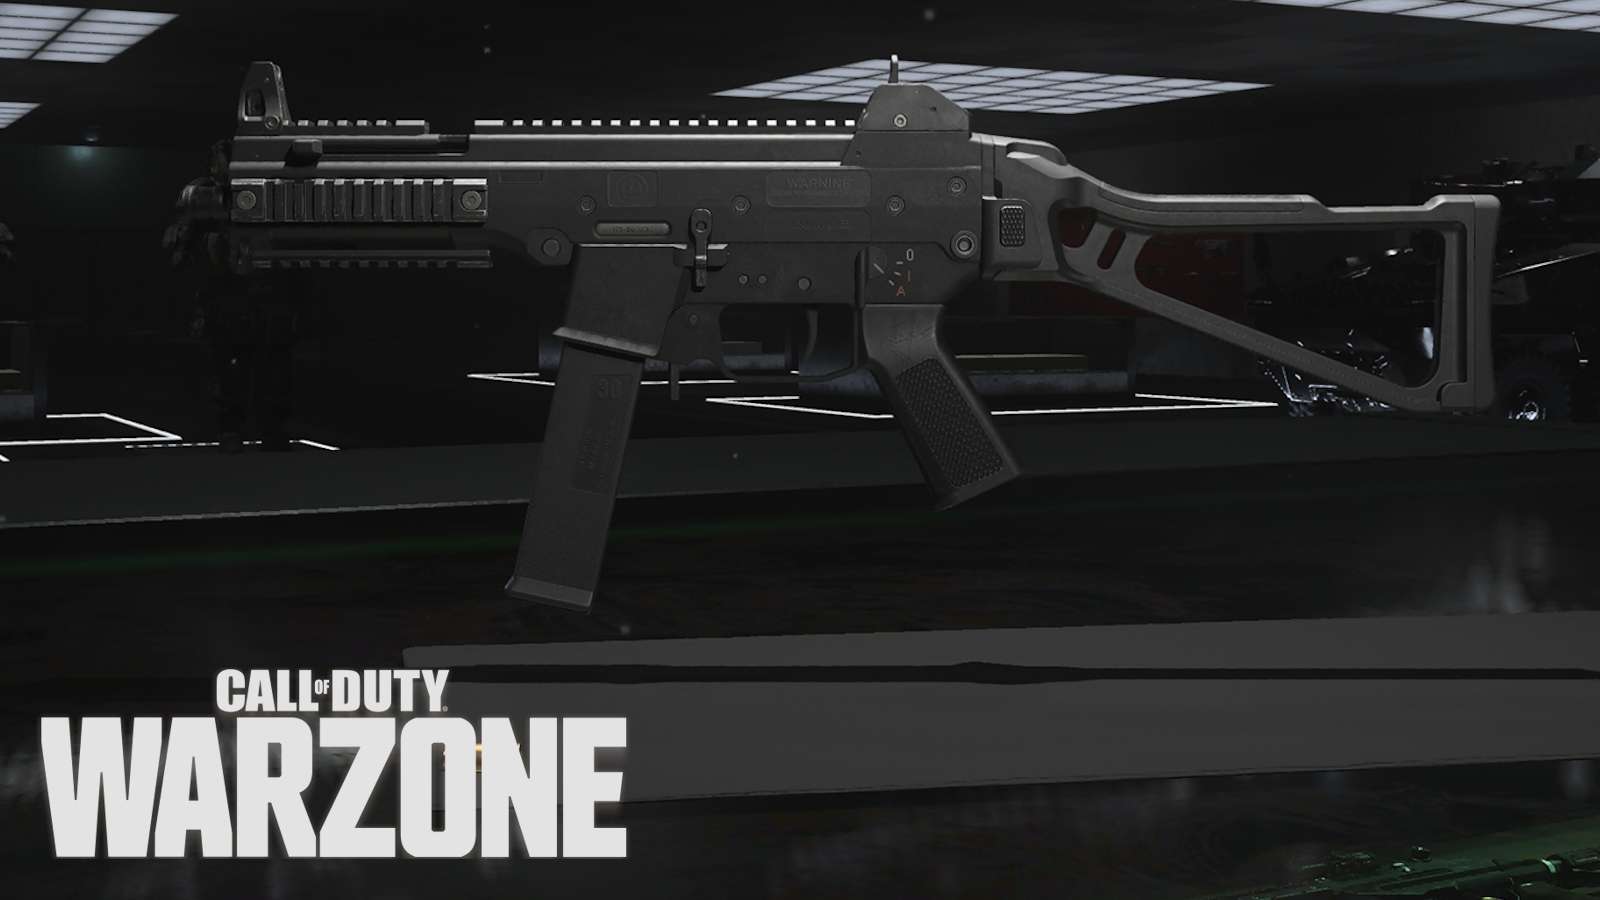 Striker SMG with Warzone logo.